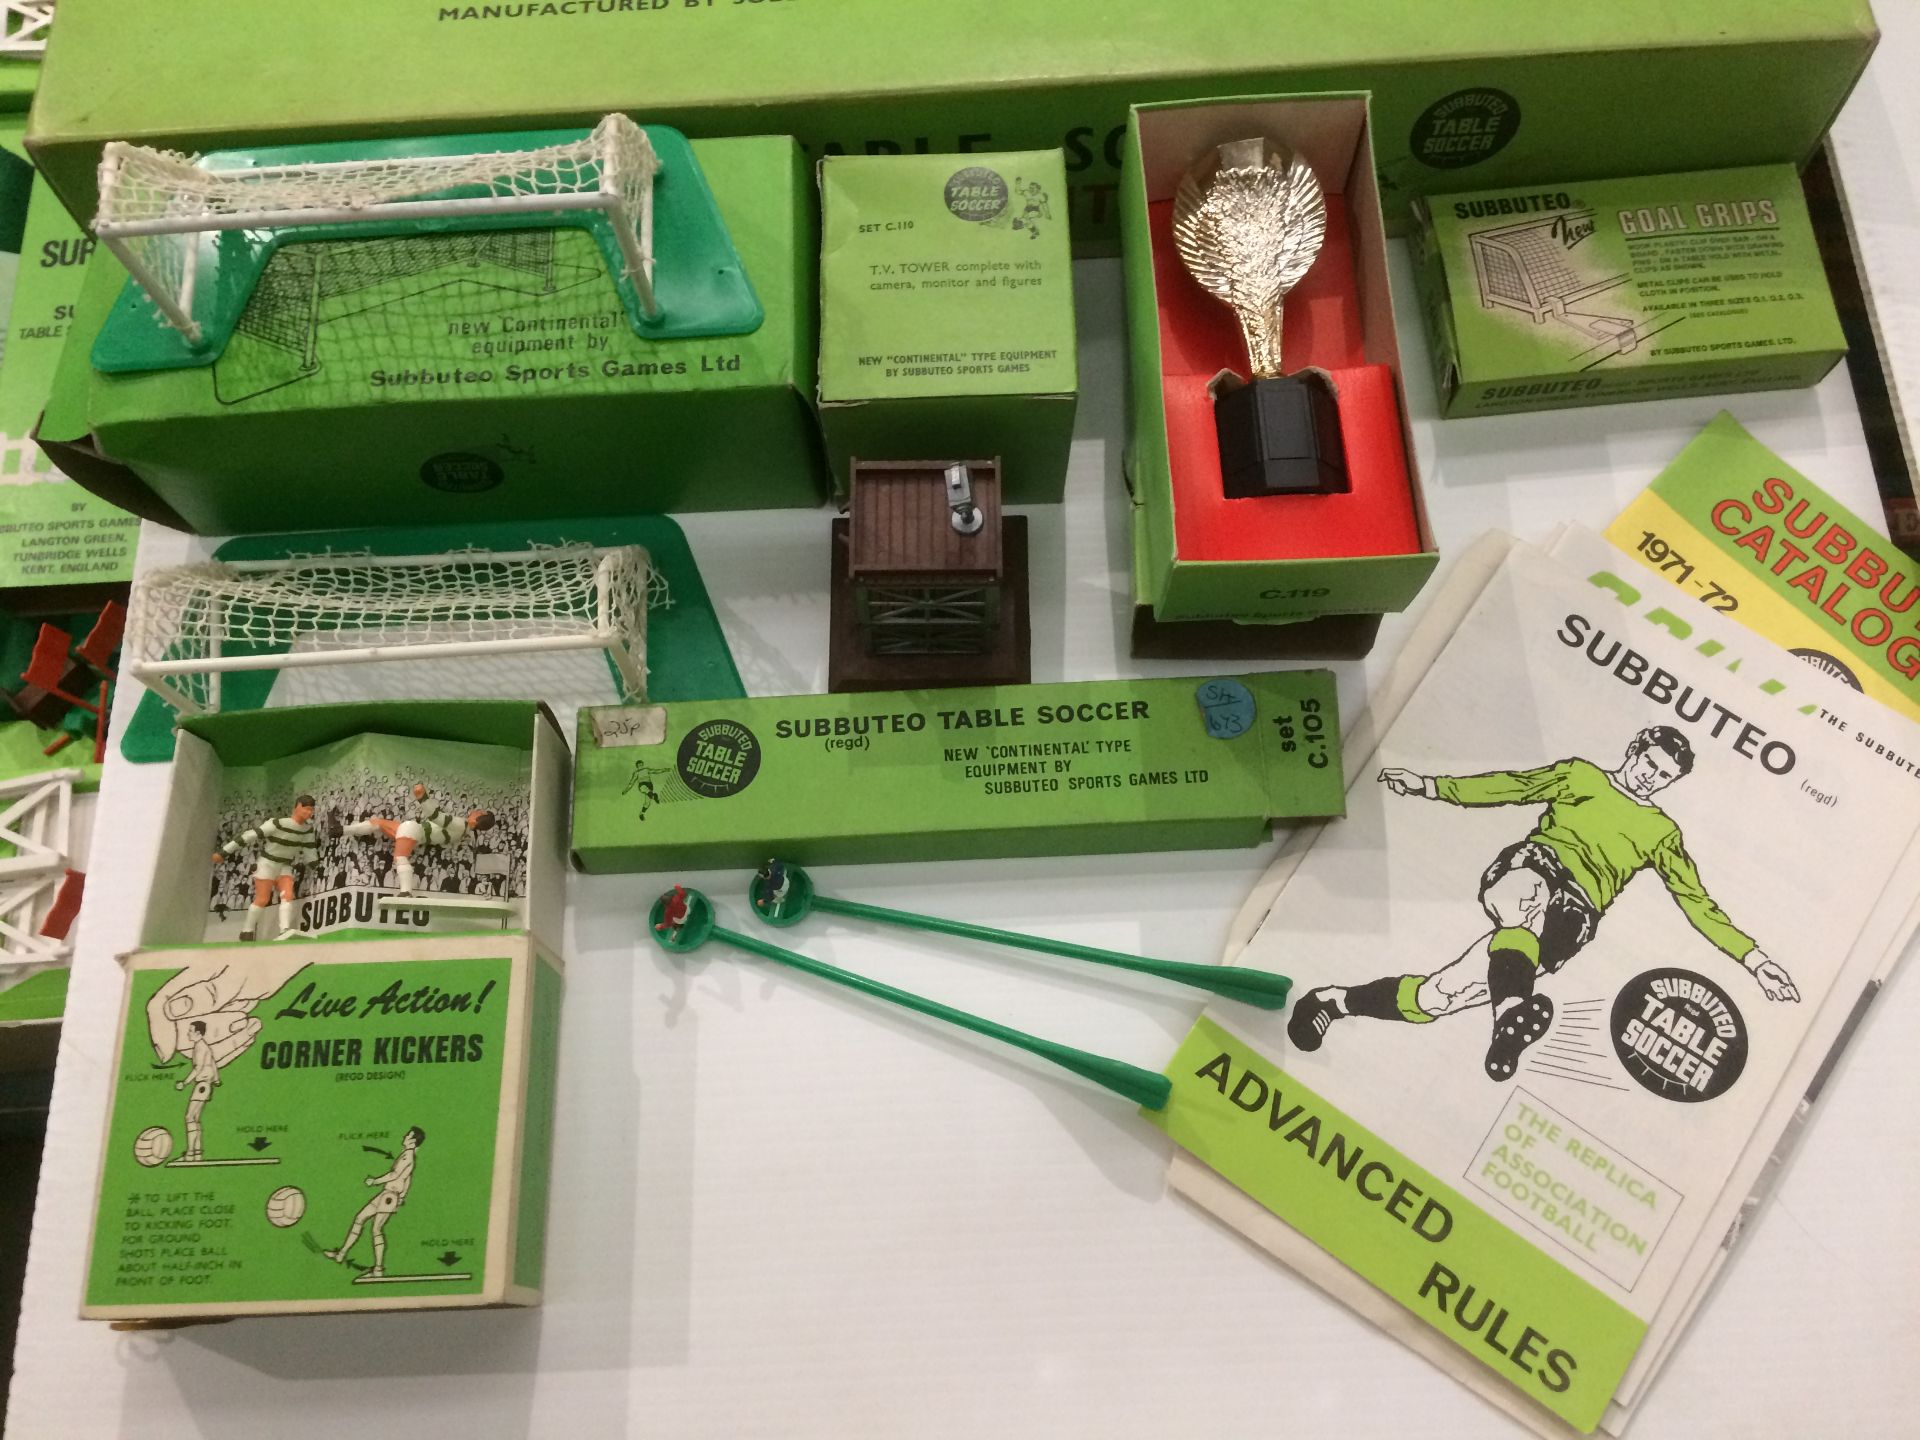 The New Subbuteo table soccer Continental 'Floodlighting' Edition boxed it includes a full set of - Image 3 of 6